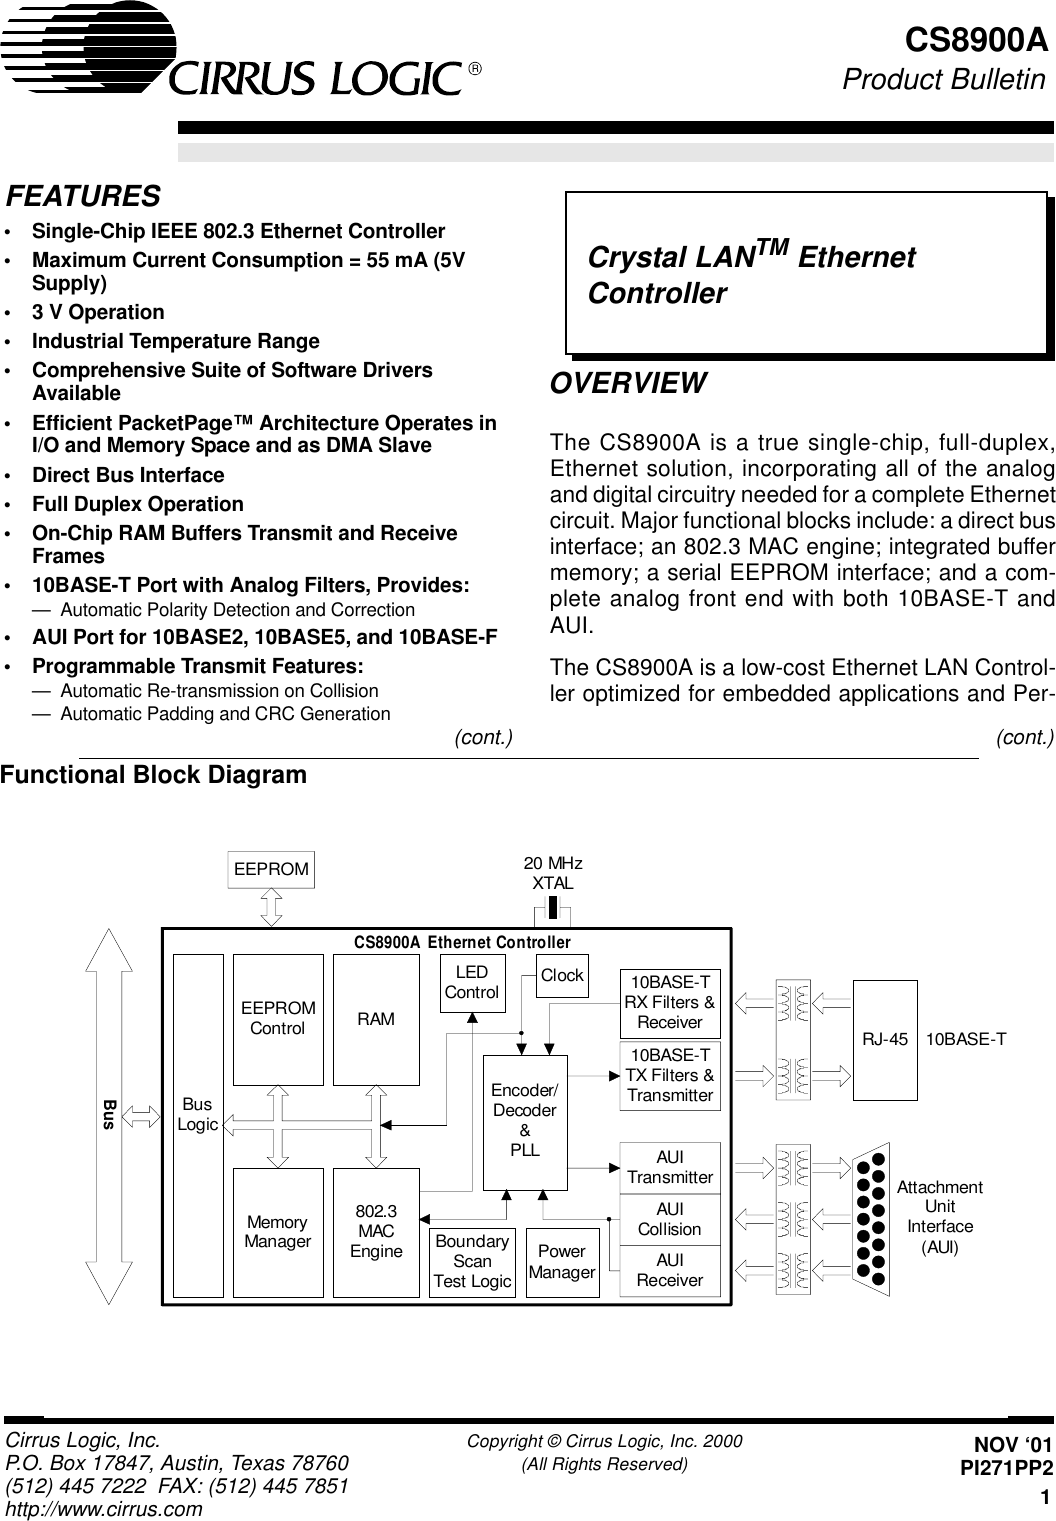 Crystal LANTM EthernetController1Cirrus Logic, Inc. Copyright © Cirrus Logic, Inc. 2000P.O. Box 17847, Austin, Texas 78760 (All Rights Reserved)(512) 445 7222 FAX: (512) 445 7851http://www.cirrus.comCS8900AOVERVIEWFEATURES•Single-Chip IEEE 802.3 Ethernet Controller•Maximum Current Consumption = 55 mA (5VSupply)•3 V Operation•Industrial Temperature Range•Comprehensive Suite of Software DriversAvailable•Efficient PacketPage™ Architecture Operates inI/O and Memory Space and as DMA Slave•Direct Bus Interface•Full Duplex Operation•On-Chip RAM Buffers Transmit and ReceiveFrames•10BASE-T Port with Analog Filters, Provides:— Automatic Polarity Detection and Correction•AUI Port for 10BASE2, 10BASE5, and 10BASE-F•Programmable Transmit Features:— Automatic Re-transmission on Collision— Automatic Padding and CRC GenerationThe CS8900A is a true single-chip, full-duplex,Ethernet solution, incorporating all of the analogand digital circuitry needed for a complete Ethernetcircuit. Major functional blocks include: a direct businterface; an 802.3 MAC engine; integrated buffermemory; a serial EEPROM interface; and a com-plete analog front end with both 10BASE-T andAUI.The CS8900A is a low-cost Ethernet LAN Control-ler optimized for embedded applications and Per-Functional Block DiagramEEPROMRJ-45 10BASE-TAttachmentUnitInterface(AUI)20 MHzXTALRAMBusLogicMemoryManager802.3MACEngineEEPROMControlEncoder/Decoder&amp;PLL10BASE-TRX Filters &amp;Receiver10BASE-TTX Filters &amp;TransmitterAUITransmitterAUICollisionAUIReceiverClockPowerManagerBoundaryScanTest LogicLEDControlCS8900A  Ethernet ControllerBus(cont.) (cont.)NOV ‘01PI271PP2Product Bulletin